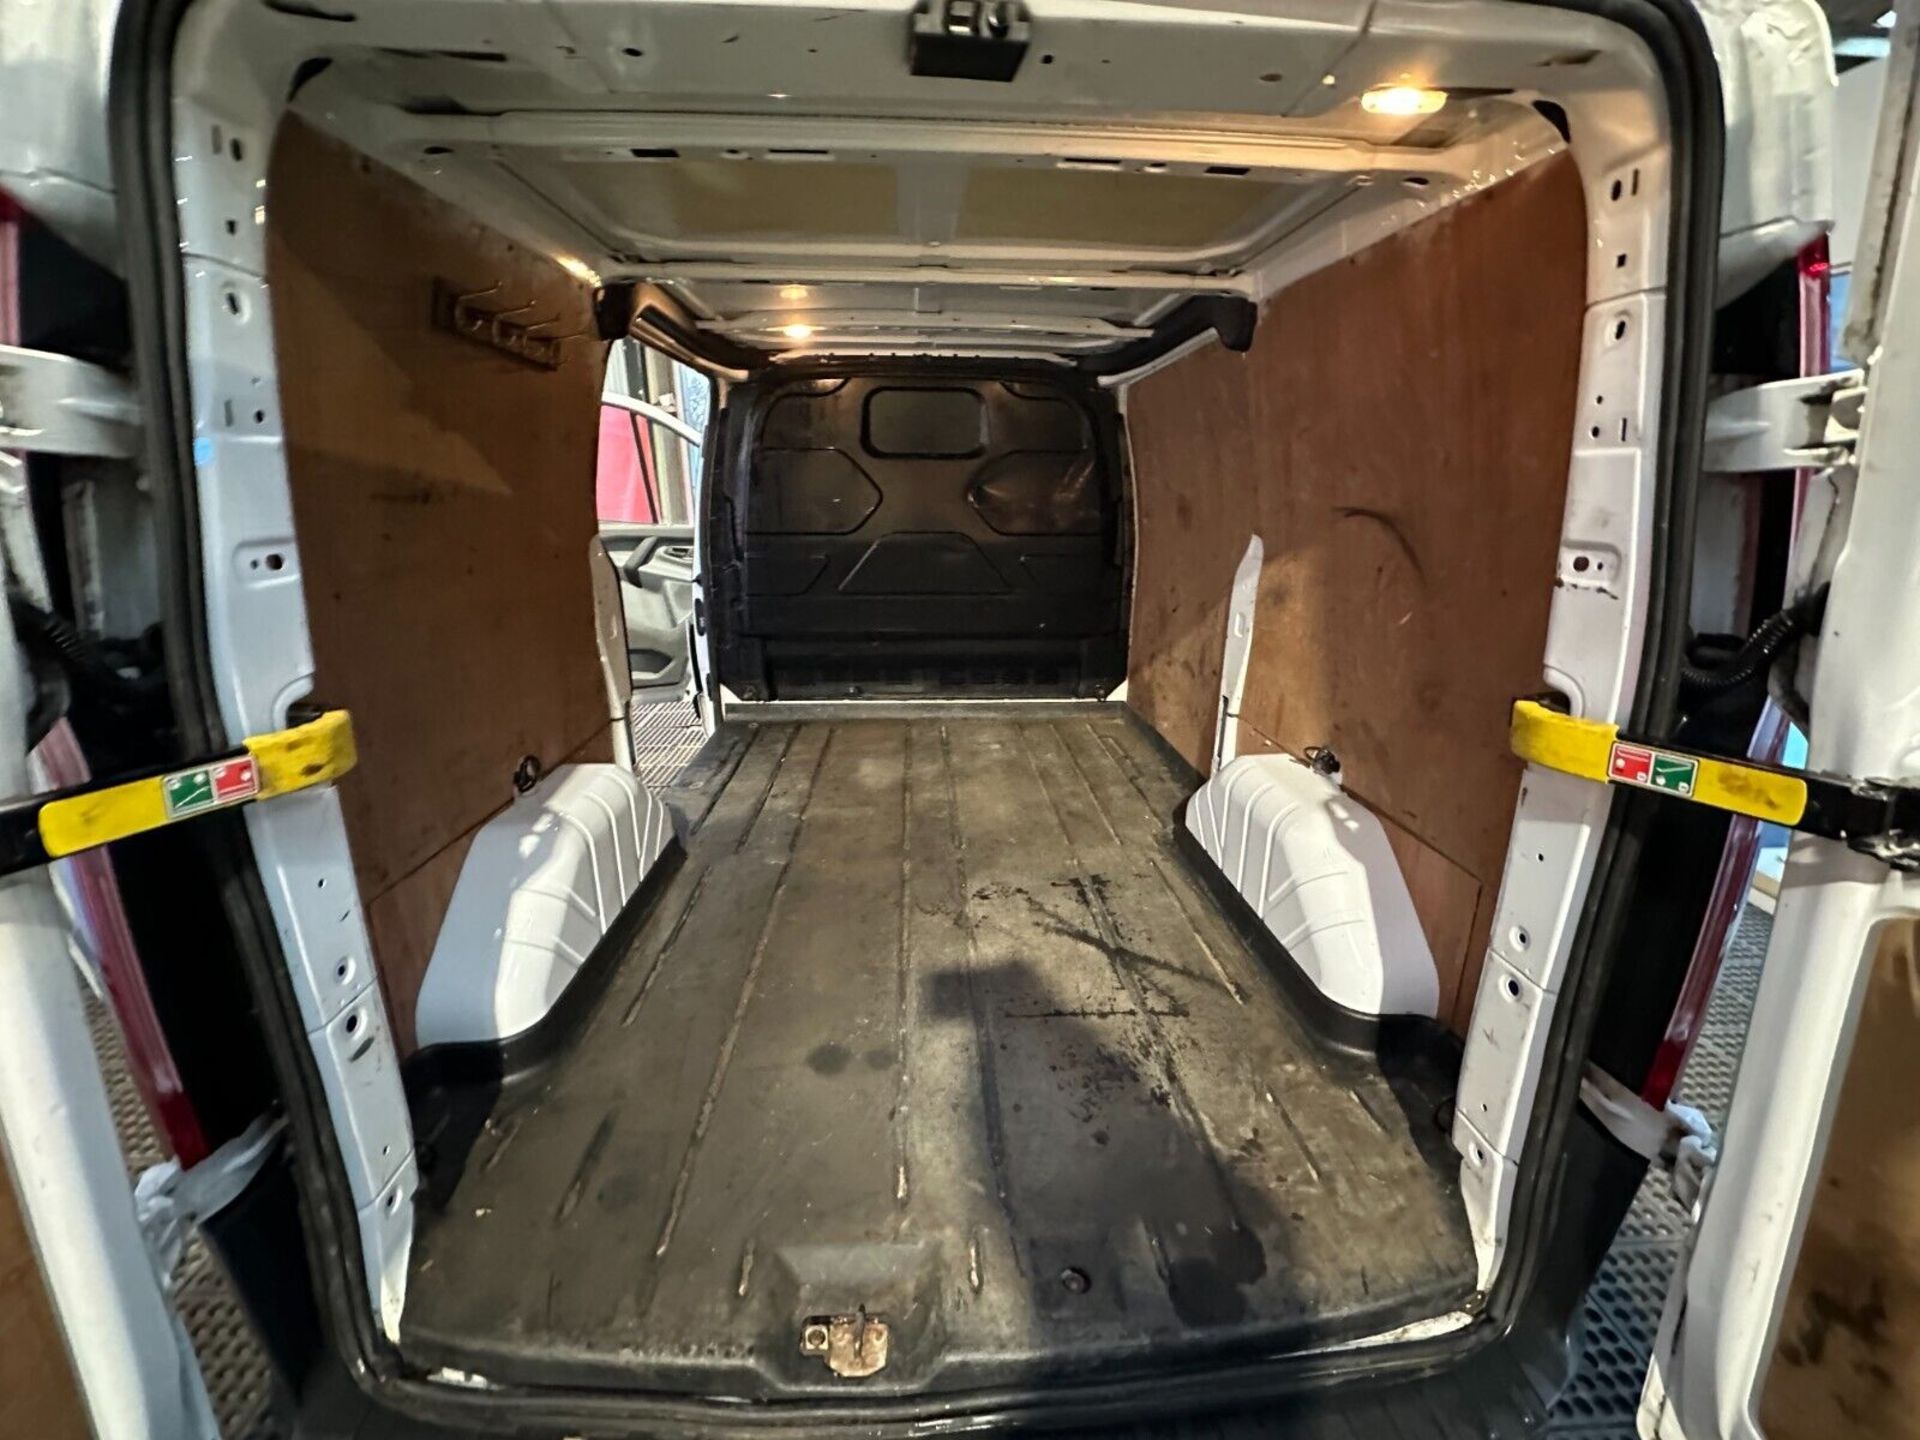 RELIABLE COMPANION: FORD TRANSIT CUSTOM 290, READY FOR DUTY - Image 13 of 14